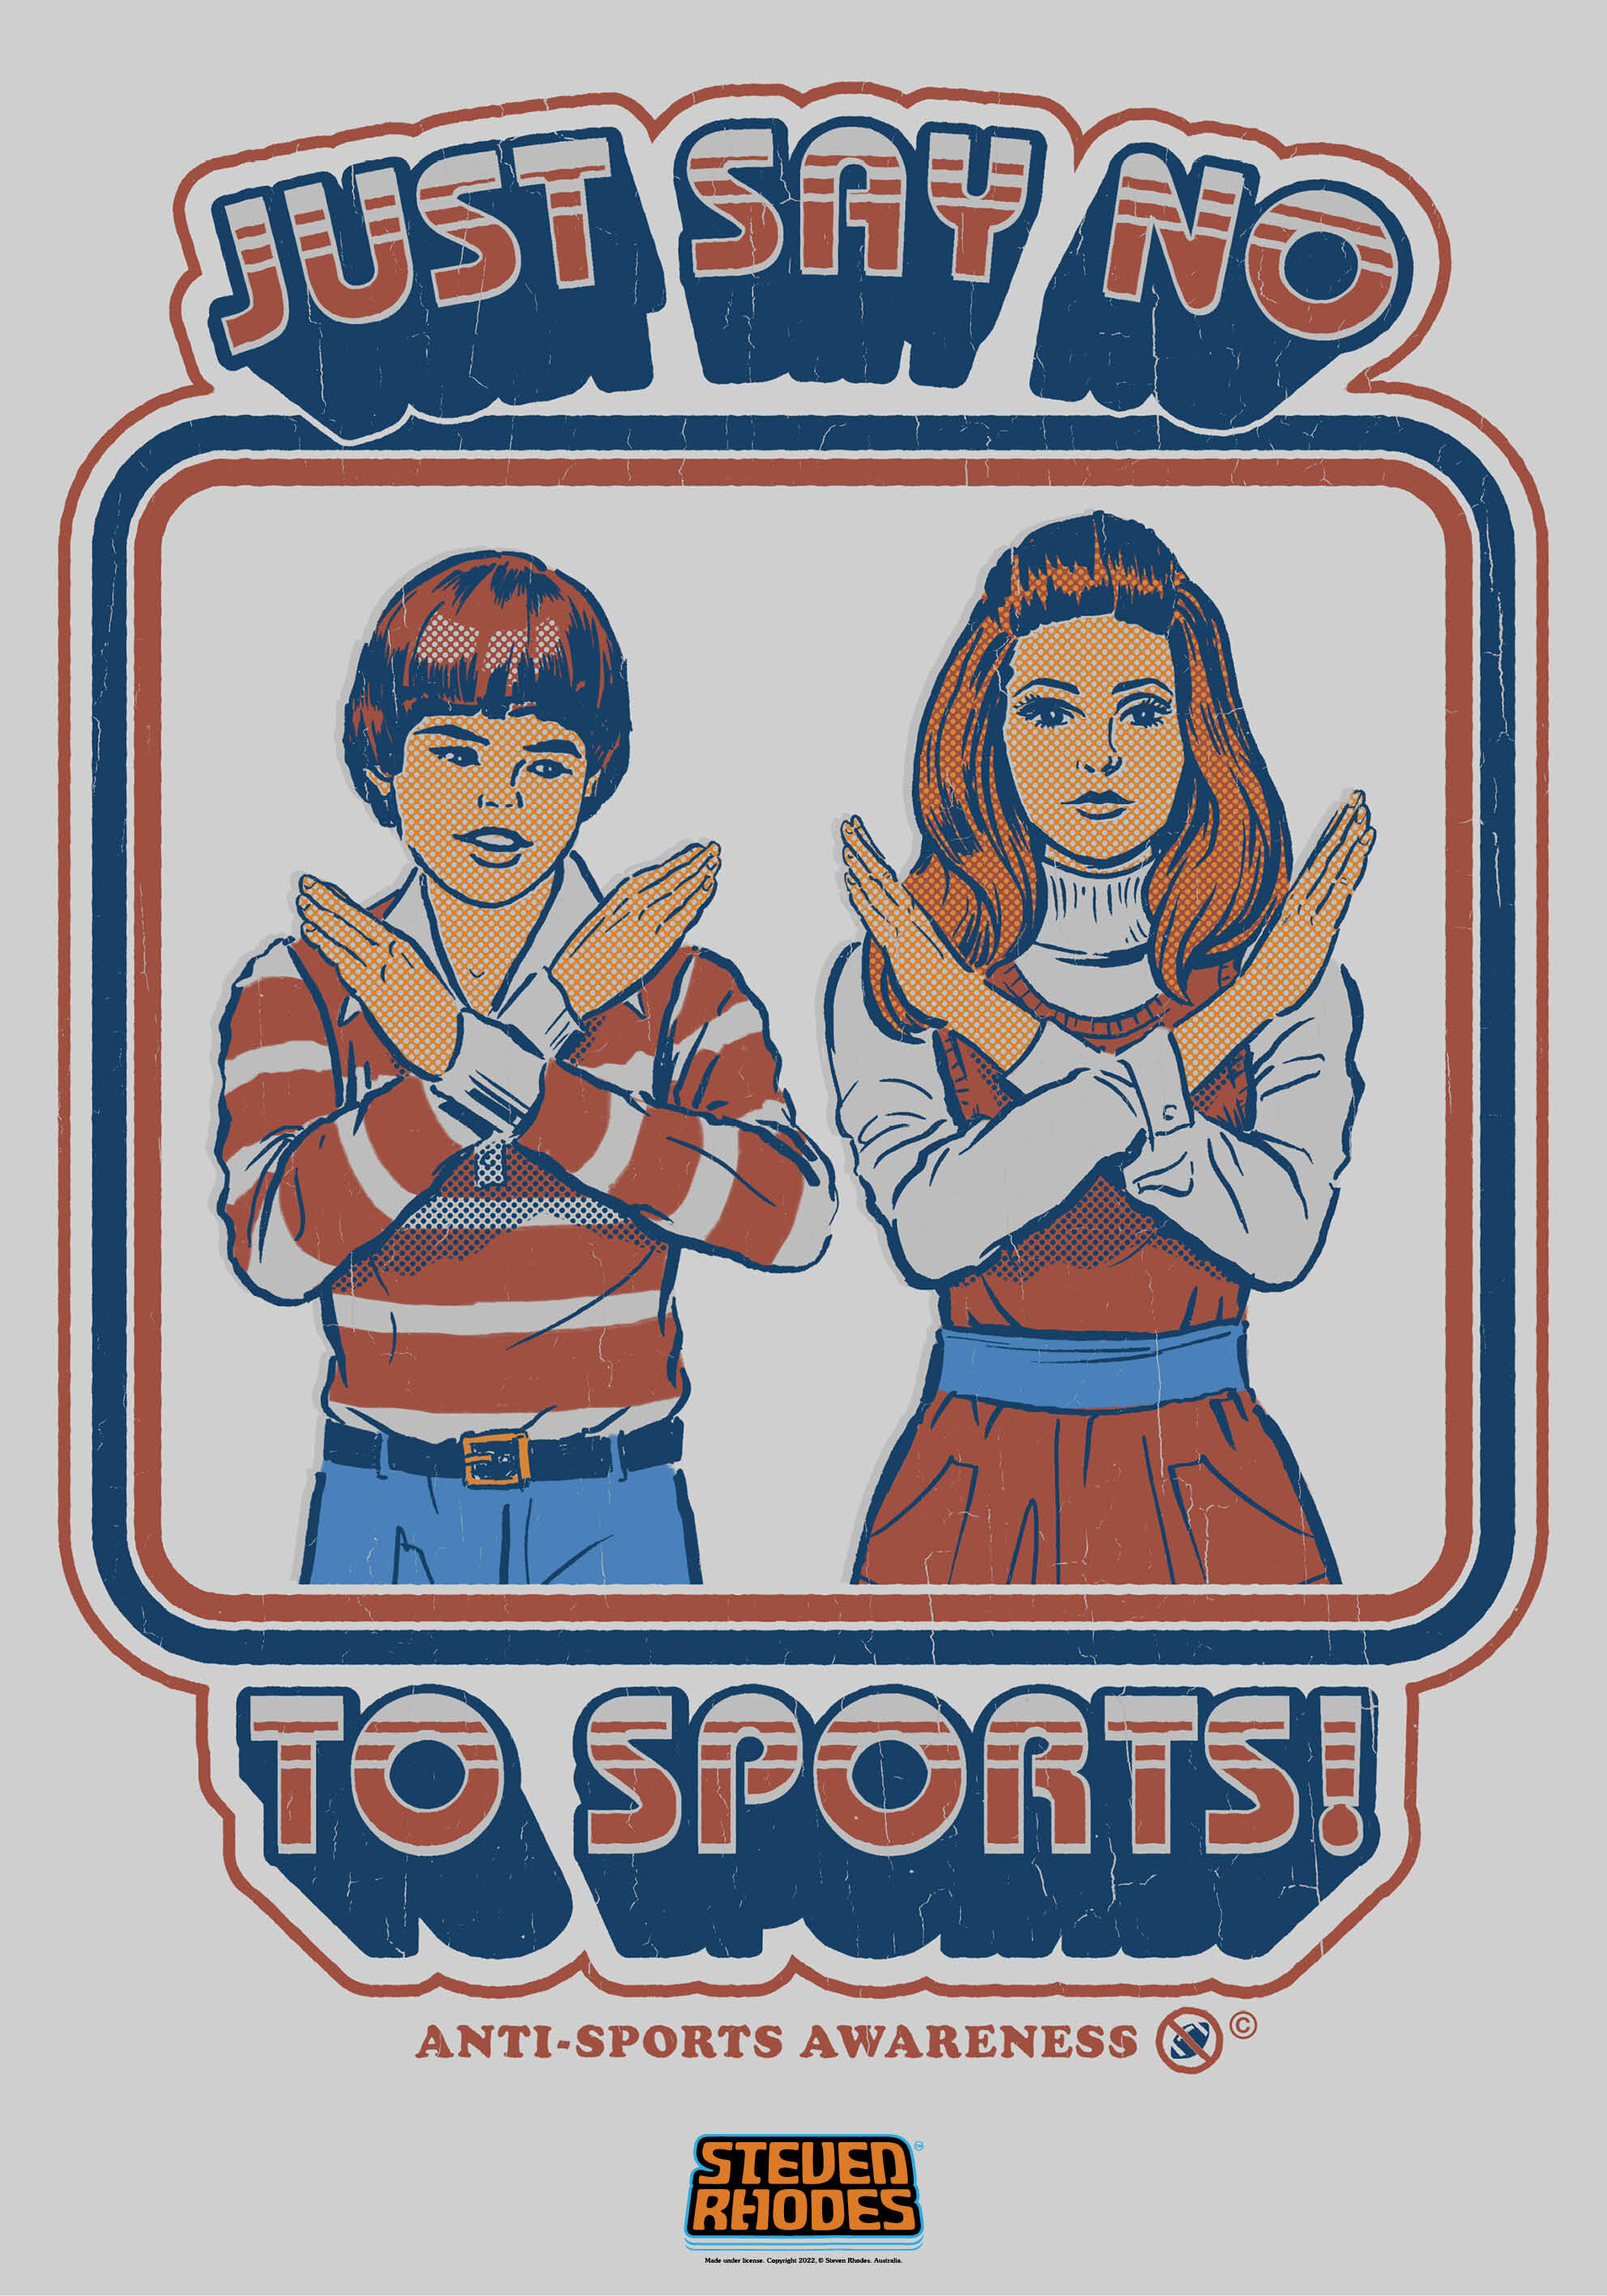 Just Say No To Sports Poster